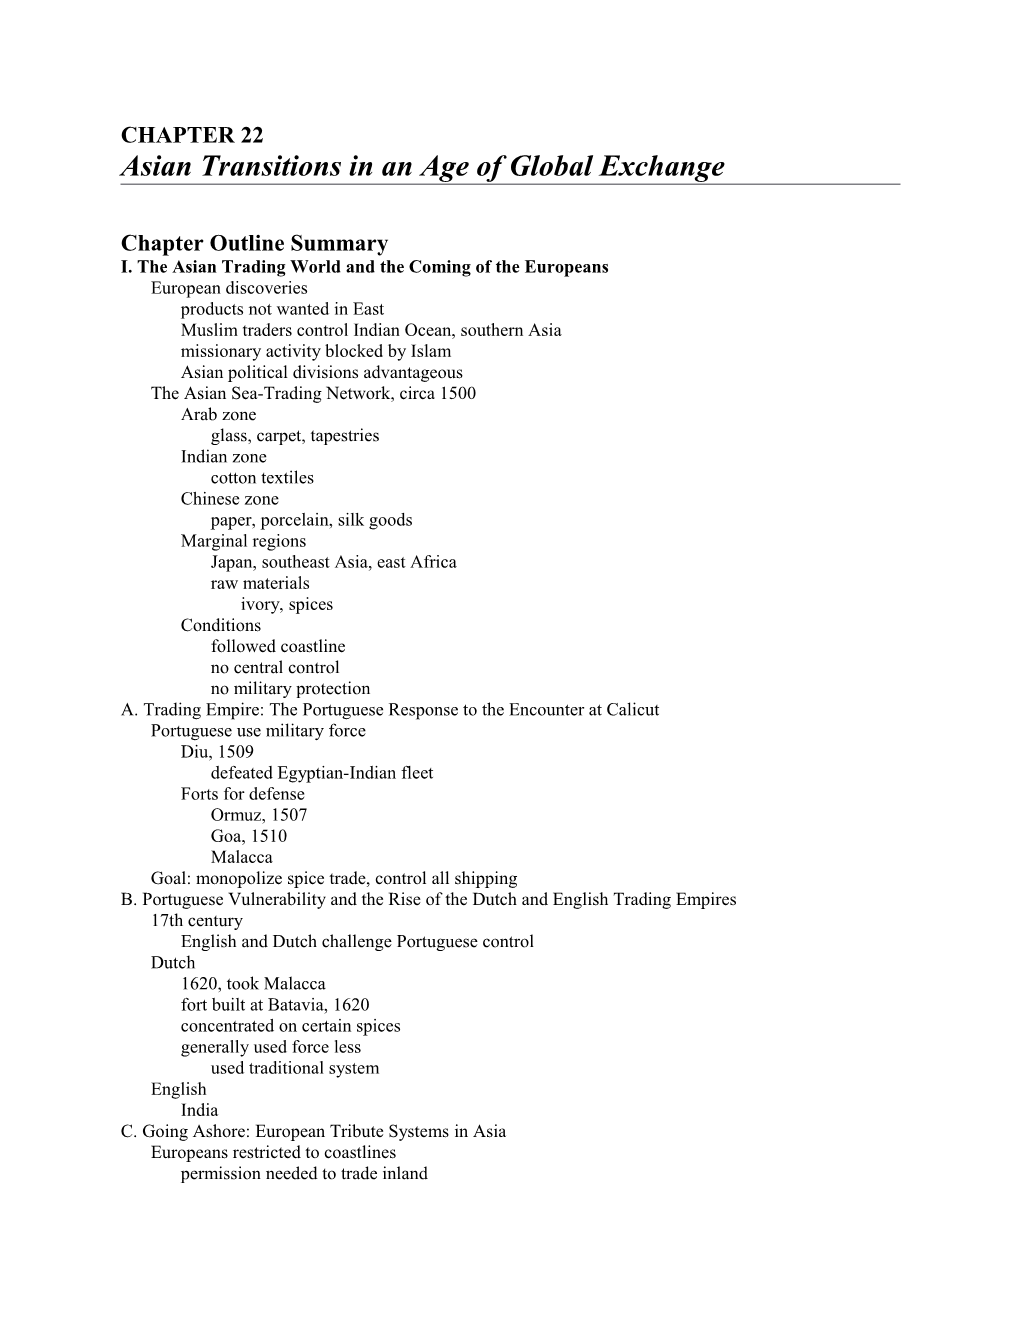 Asian Transitions in an Age of Global Exchange